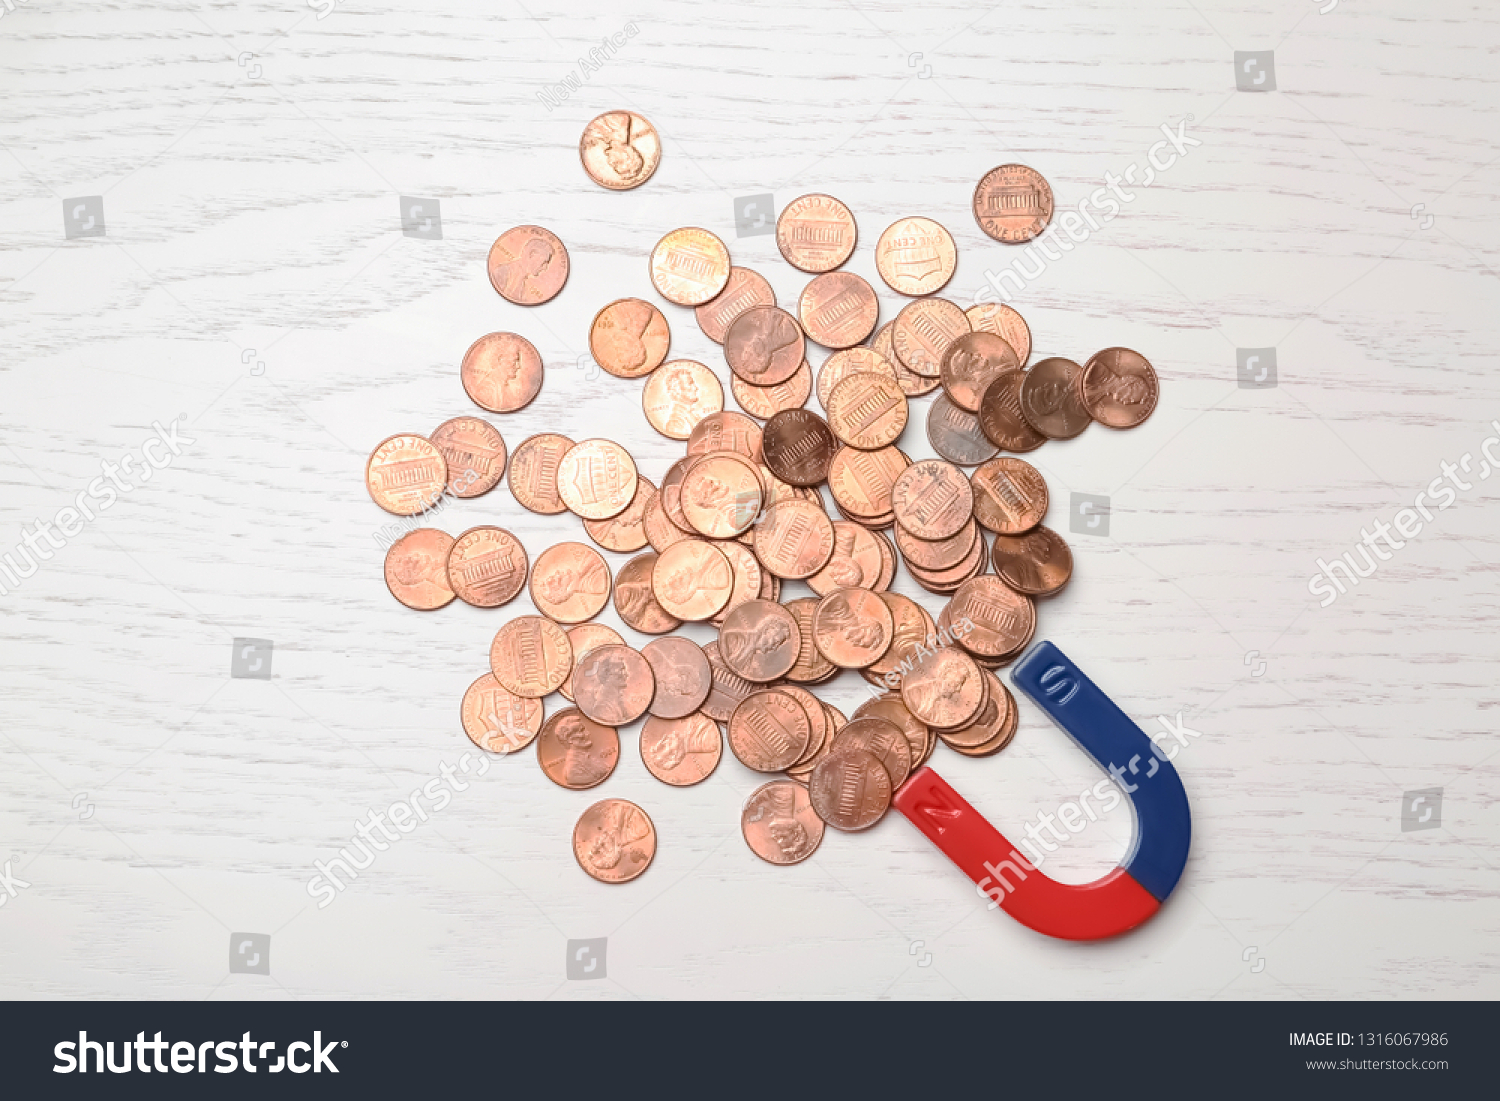 Magnet attracting coins on wooden background, top view. Business concept #1316067986